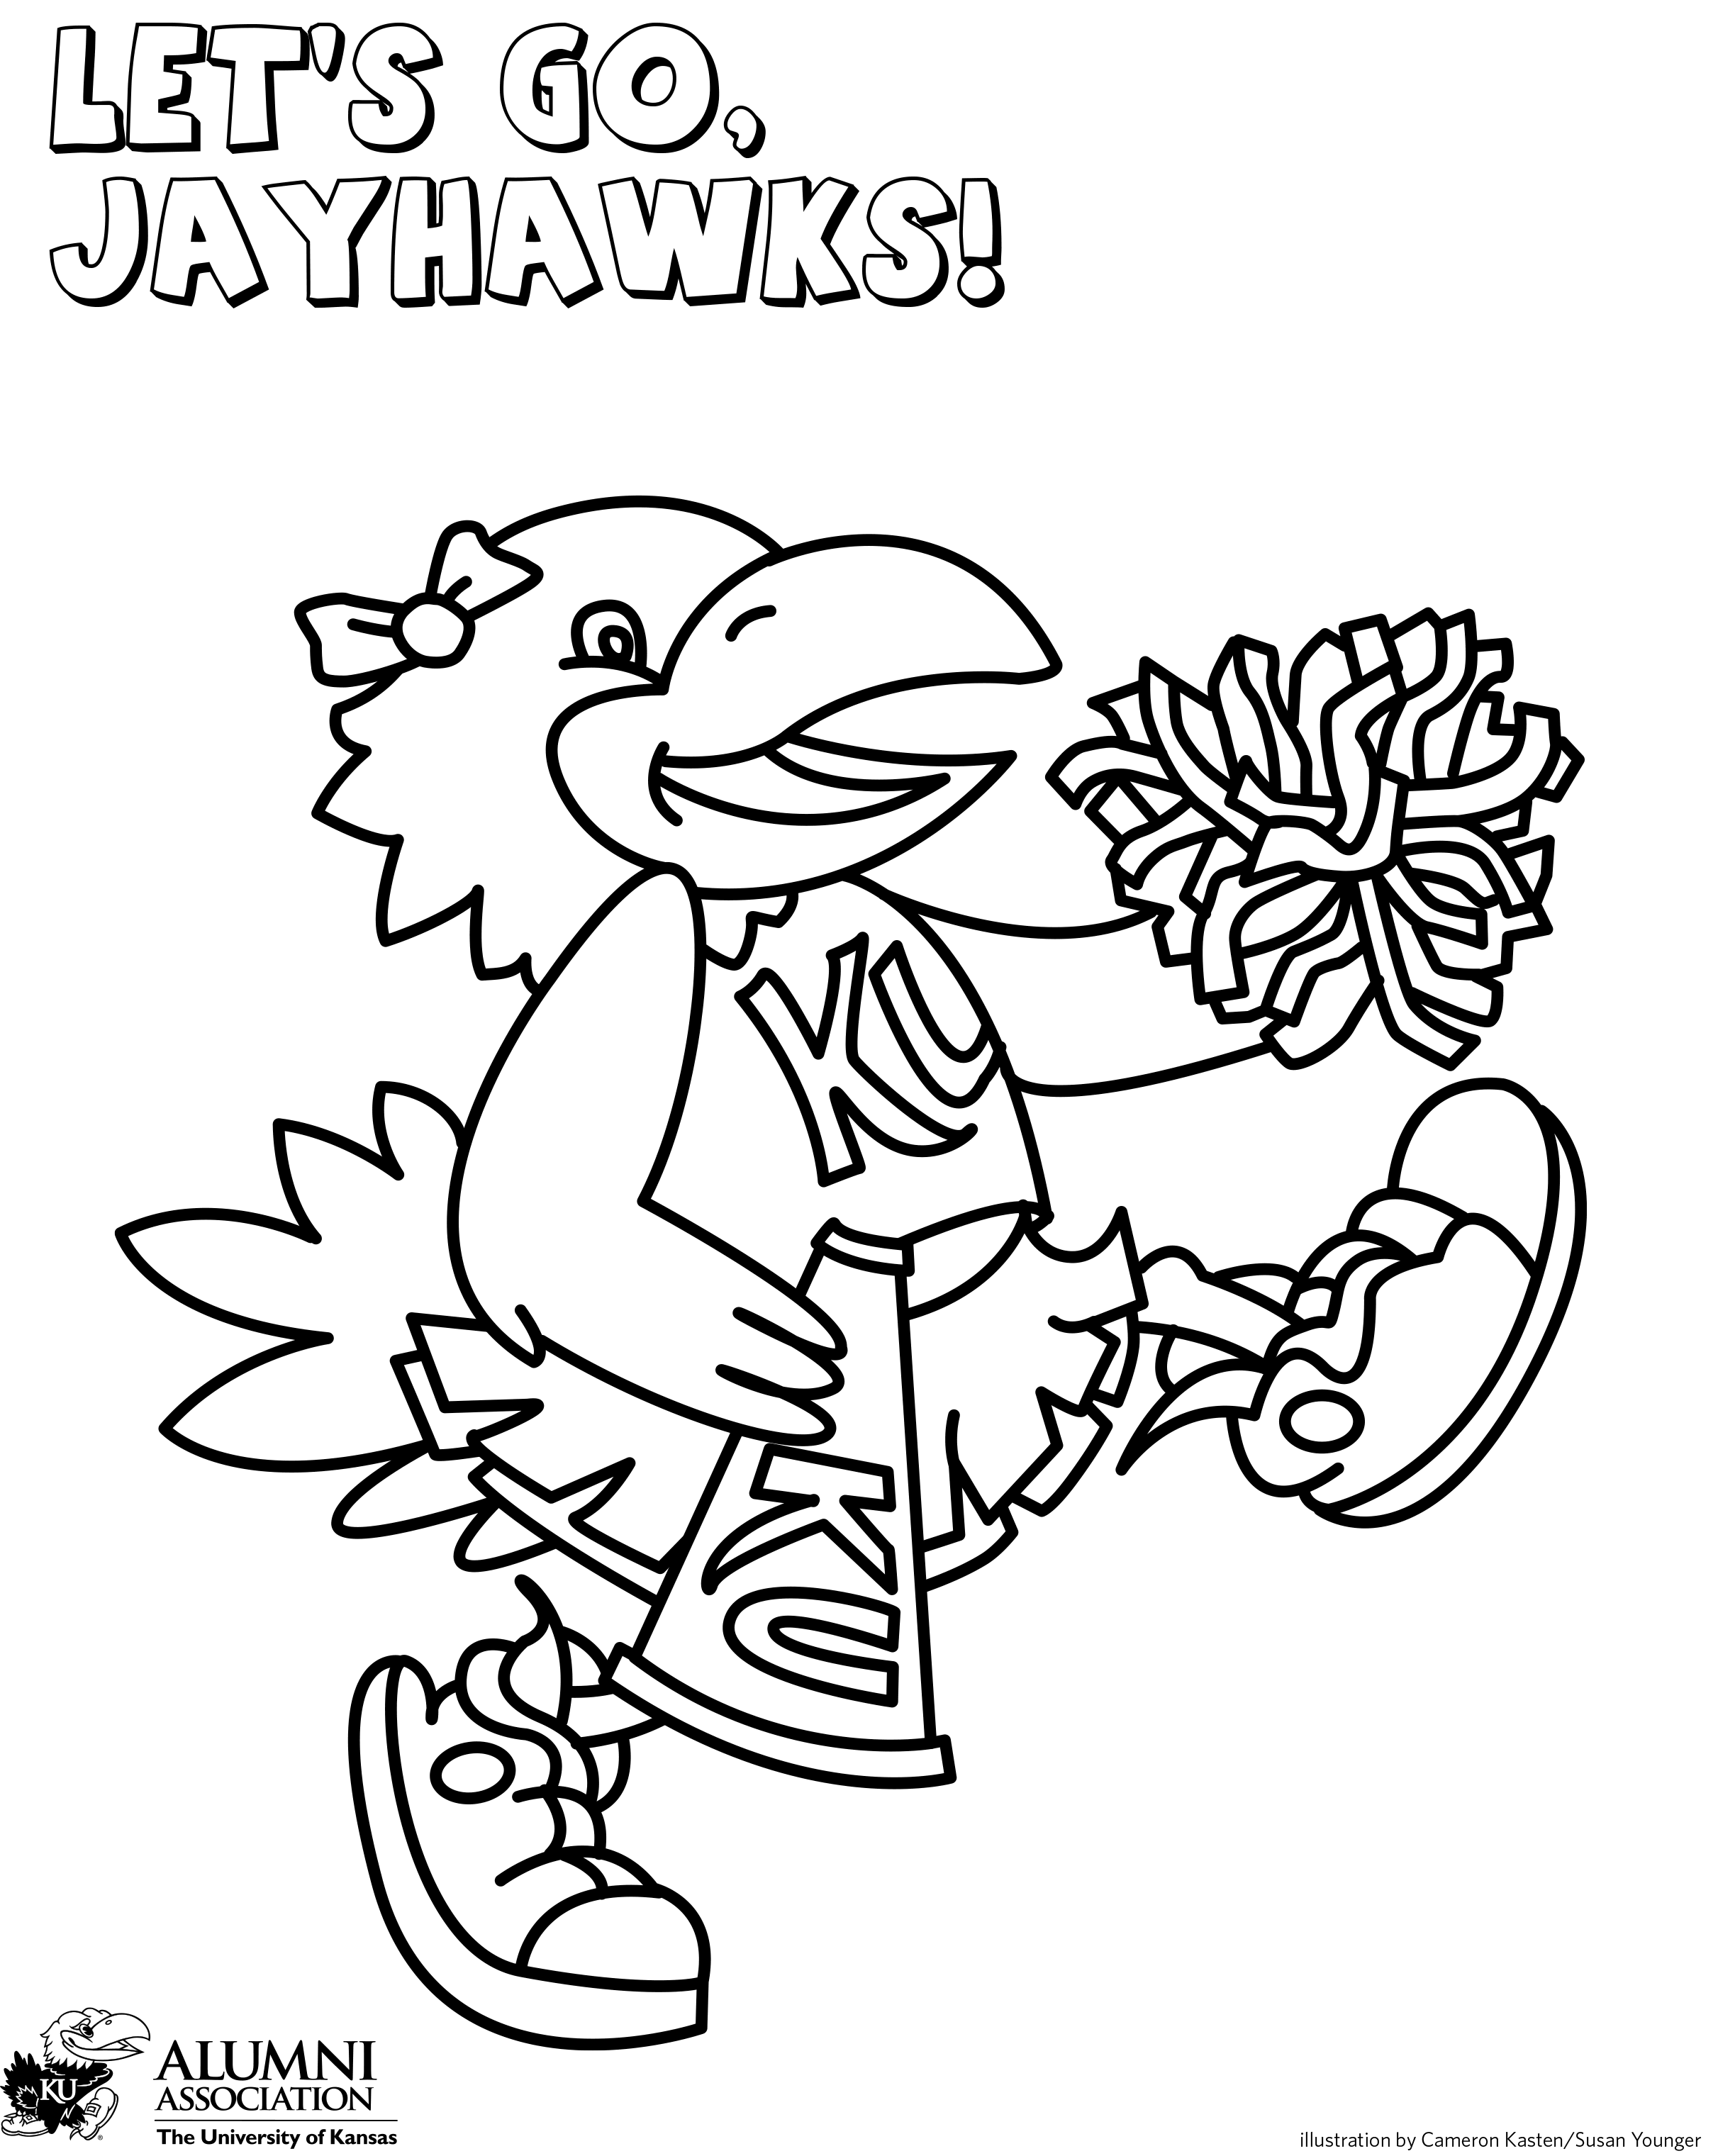 Let's Go Jayhawks - KU coloring page